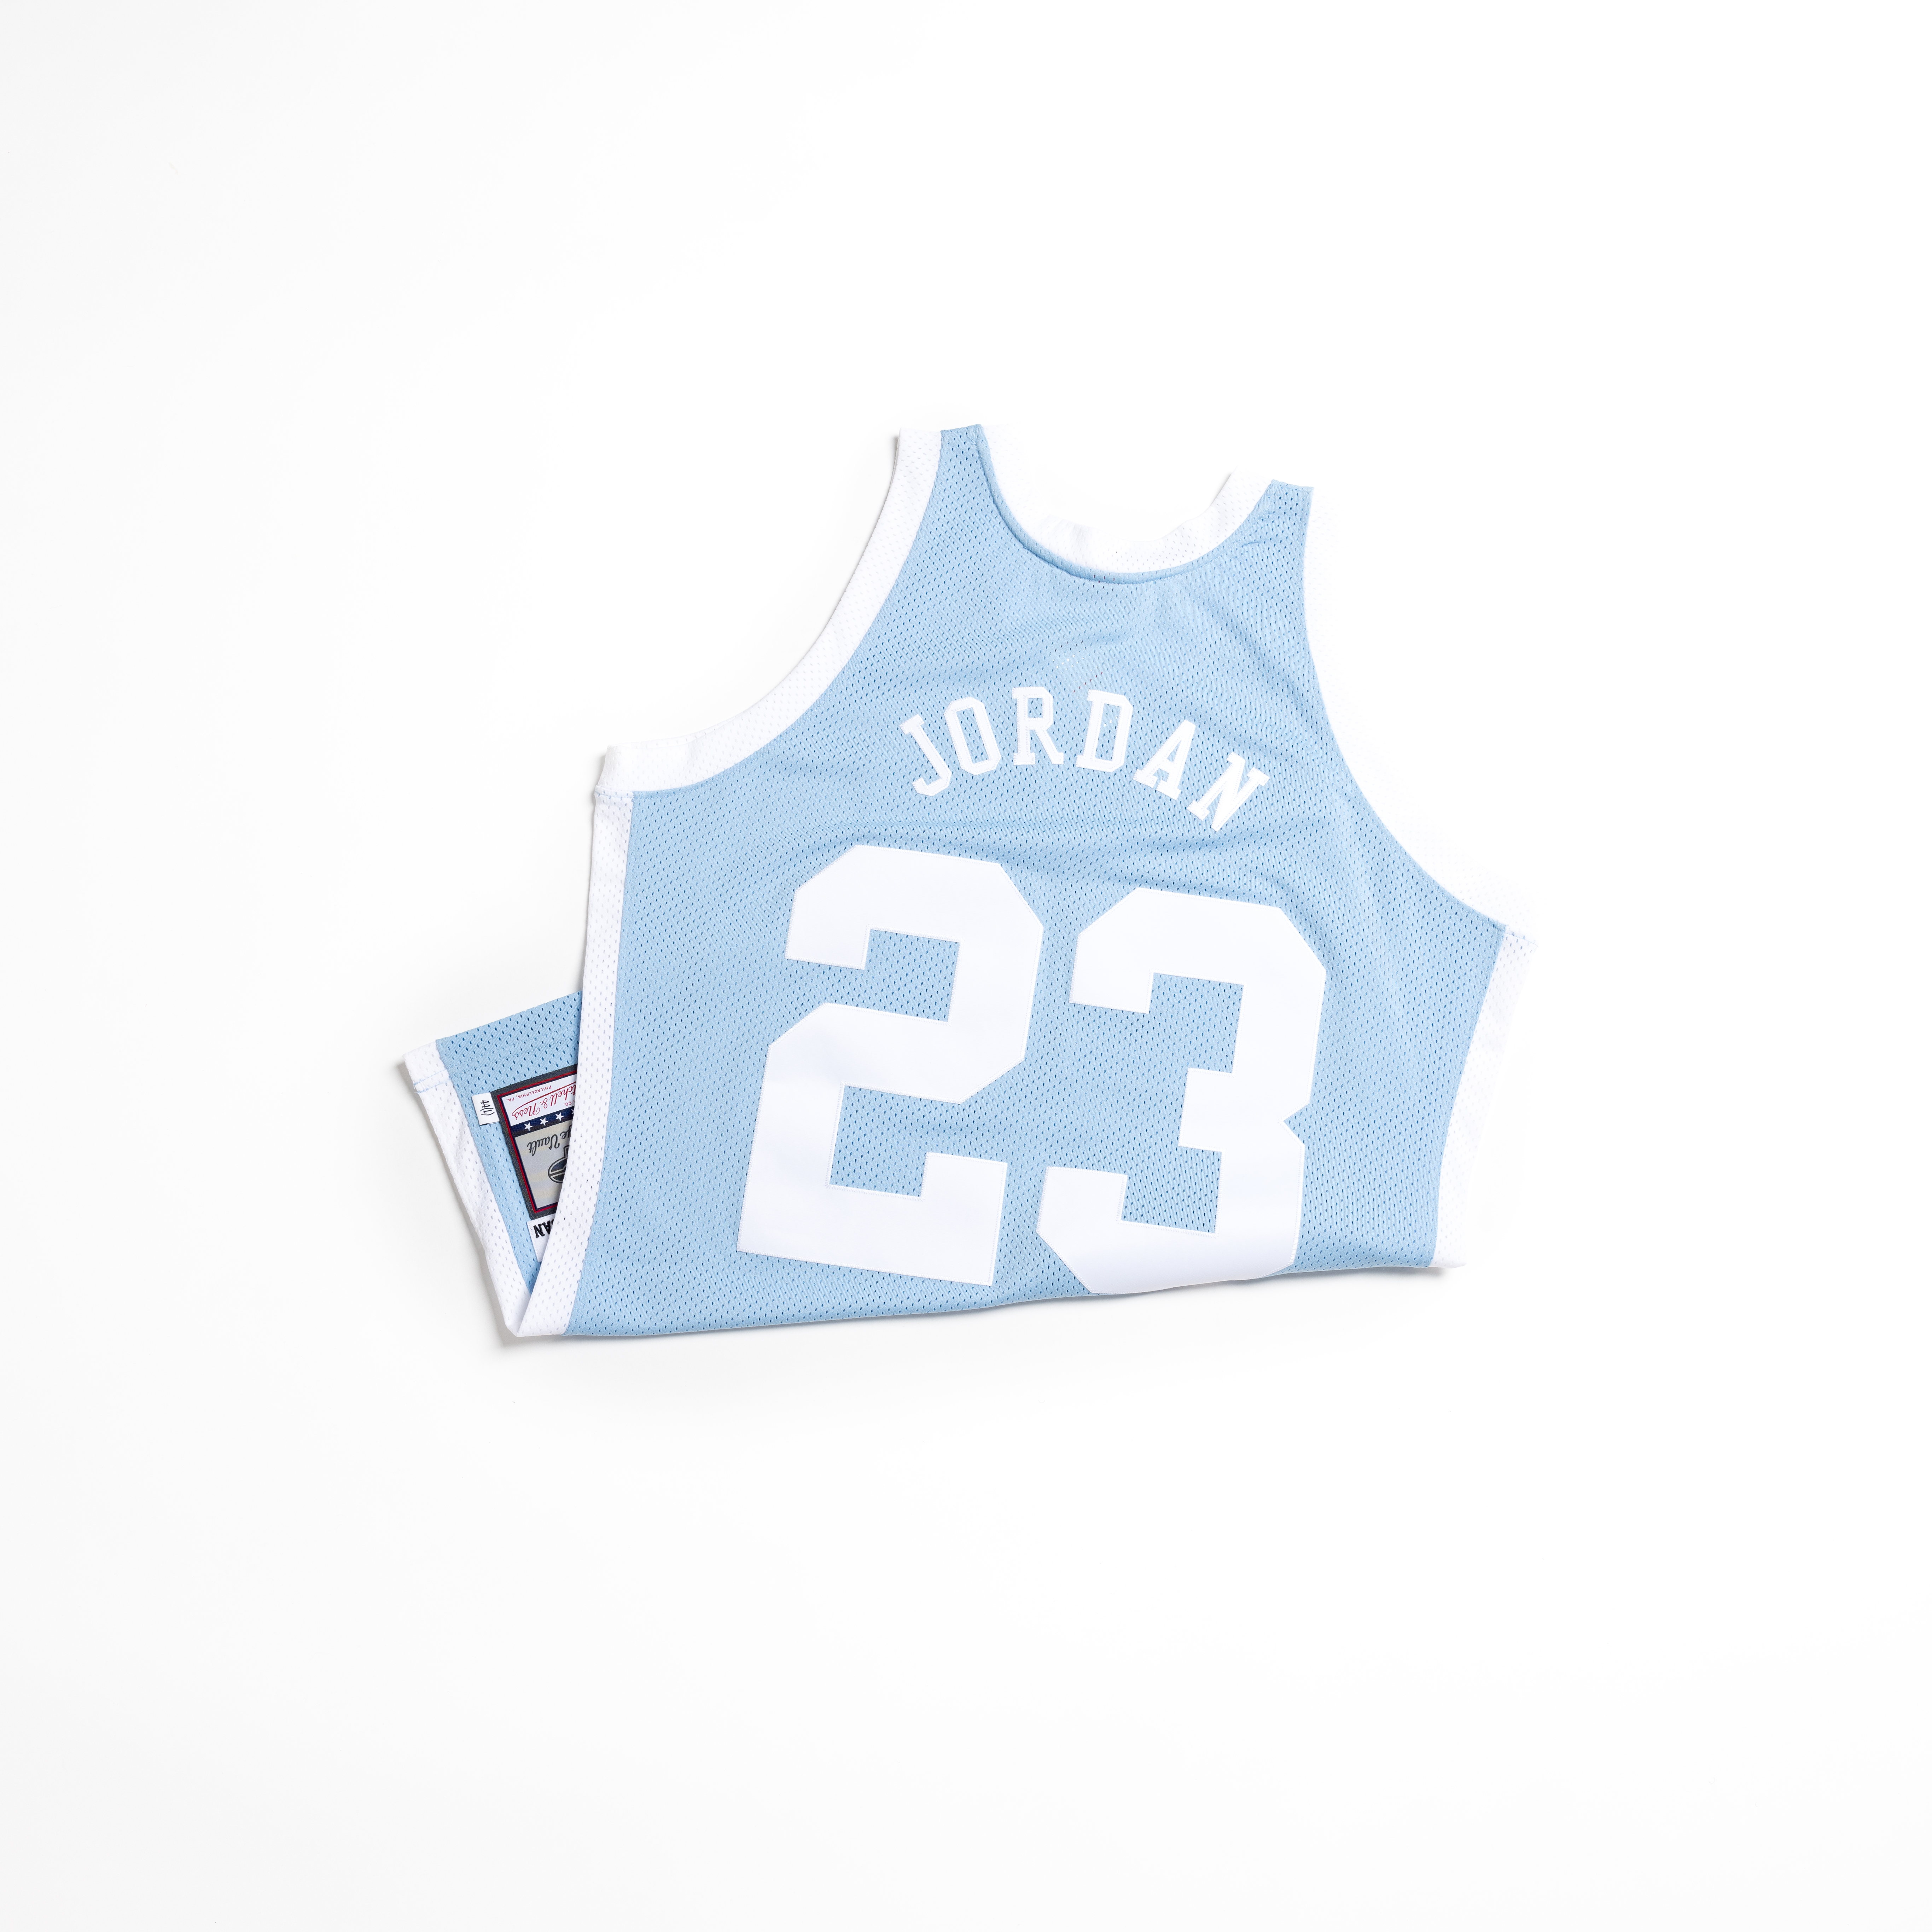 Mitchell & Ness is Releasing the Jersey Jordan Wore During His 63 Point  Explosion - WearTesters